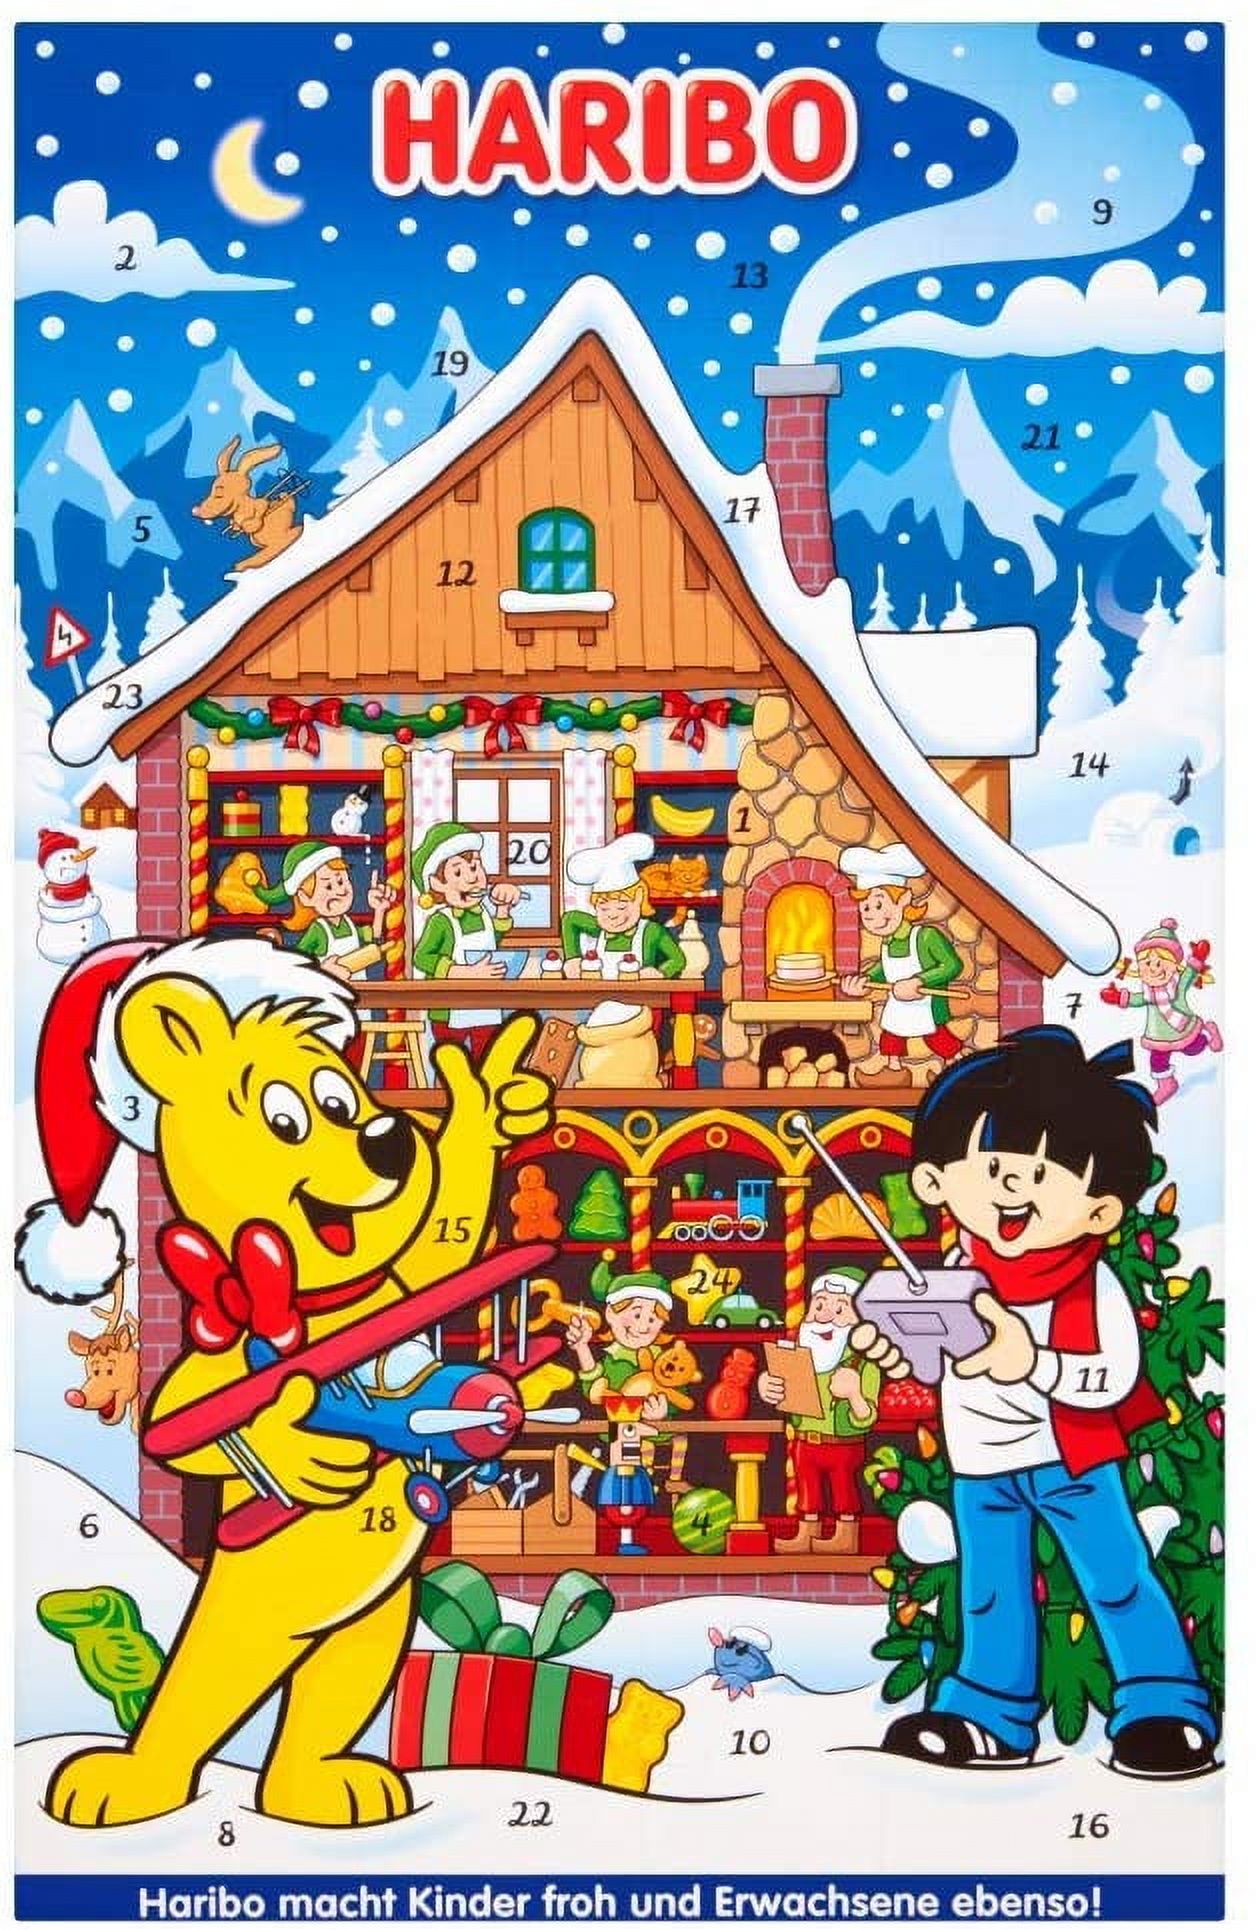 Advent Calendar (Haribo) Advent Calendar, Christmas sweets gift, 300g - UK Import - Christmas Countdown for Kids and Adults - 2-3 Days Delivery - image 1 of 5